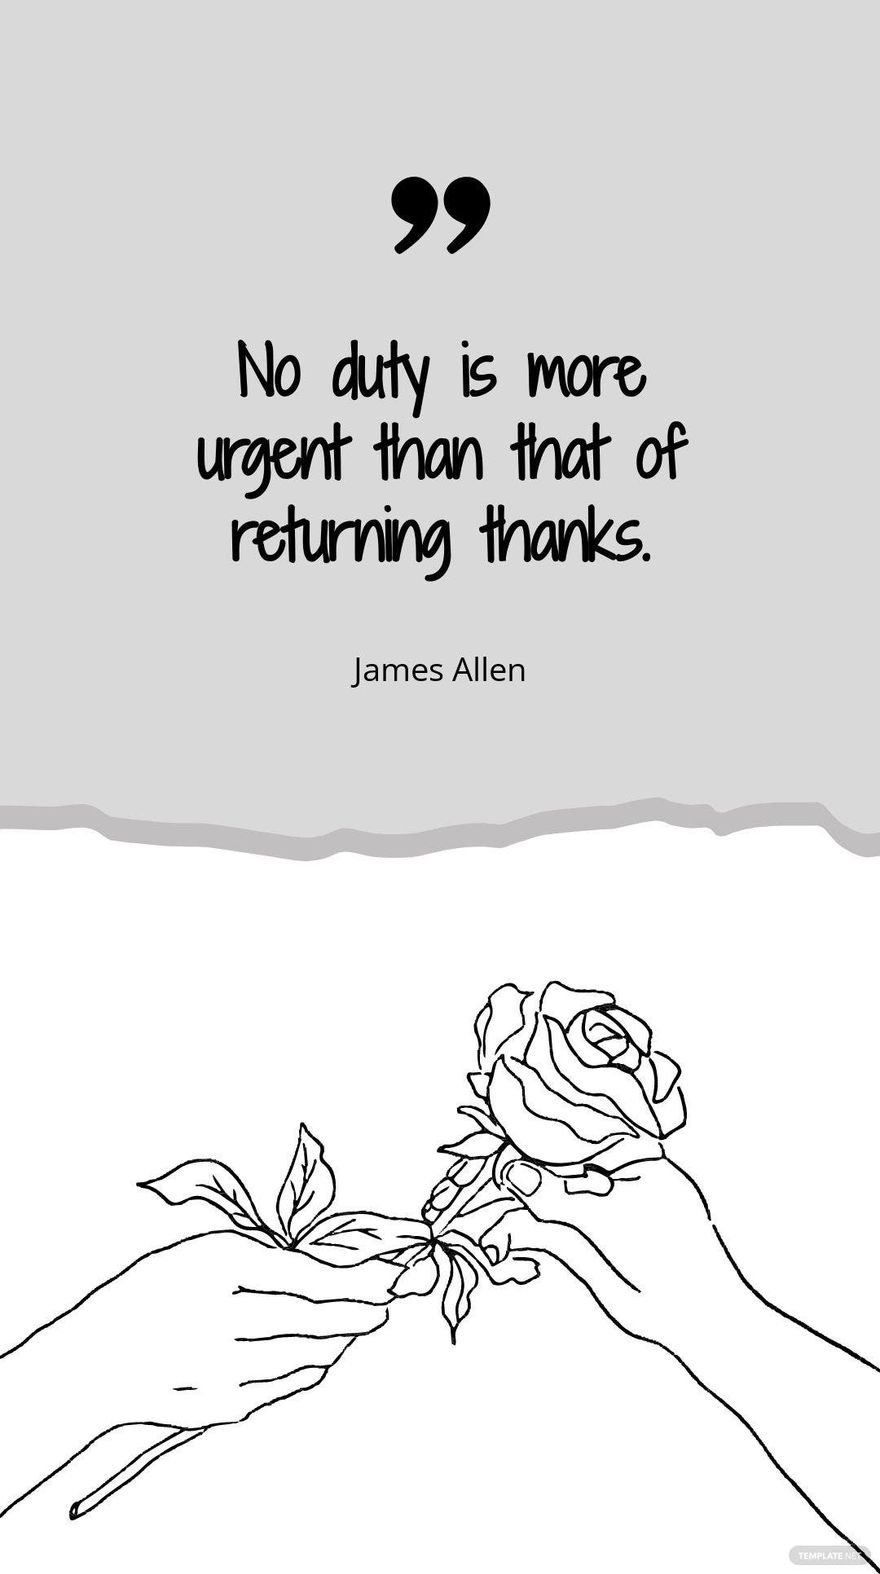 James Allen - "No duty is more urgent than that of returning thanks.” in JPG